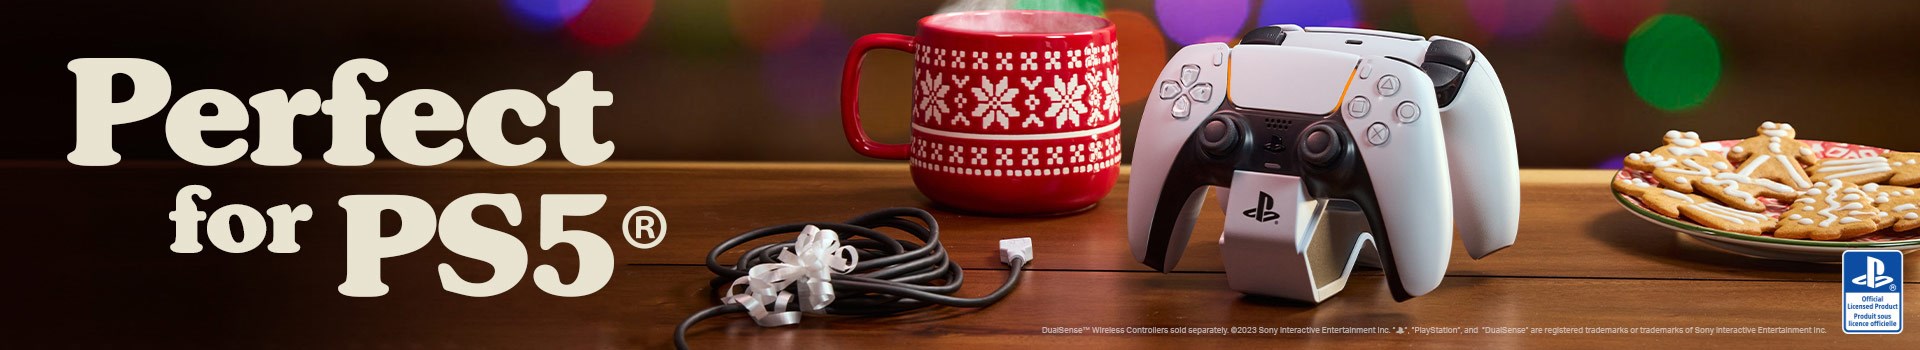 Twin Charging Station for DualSense Wireless Controllers on a table with gingerbread cookies and a steaming mug of something festive.